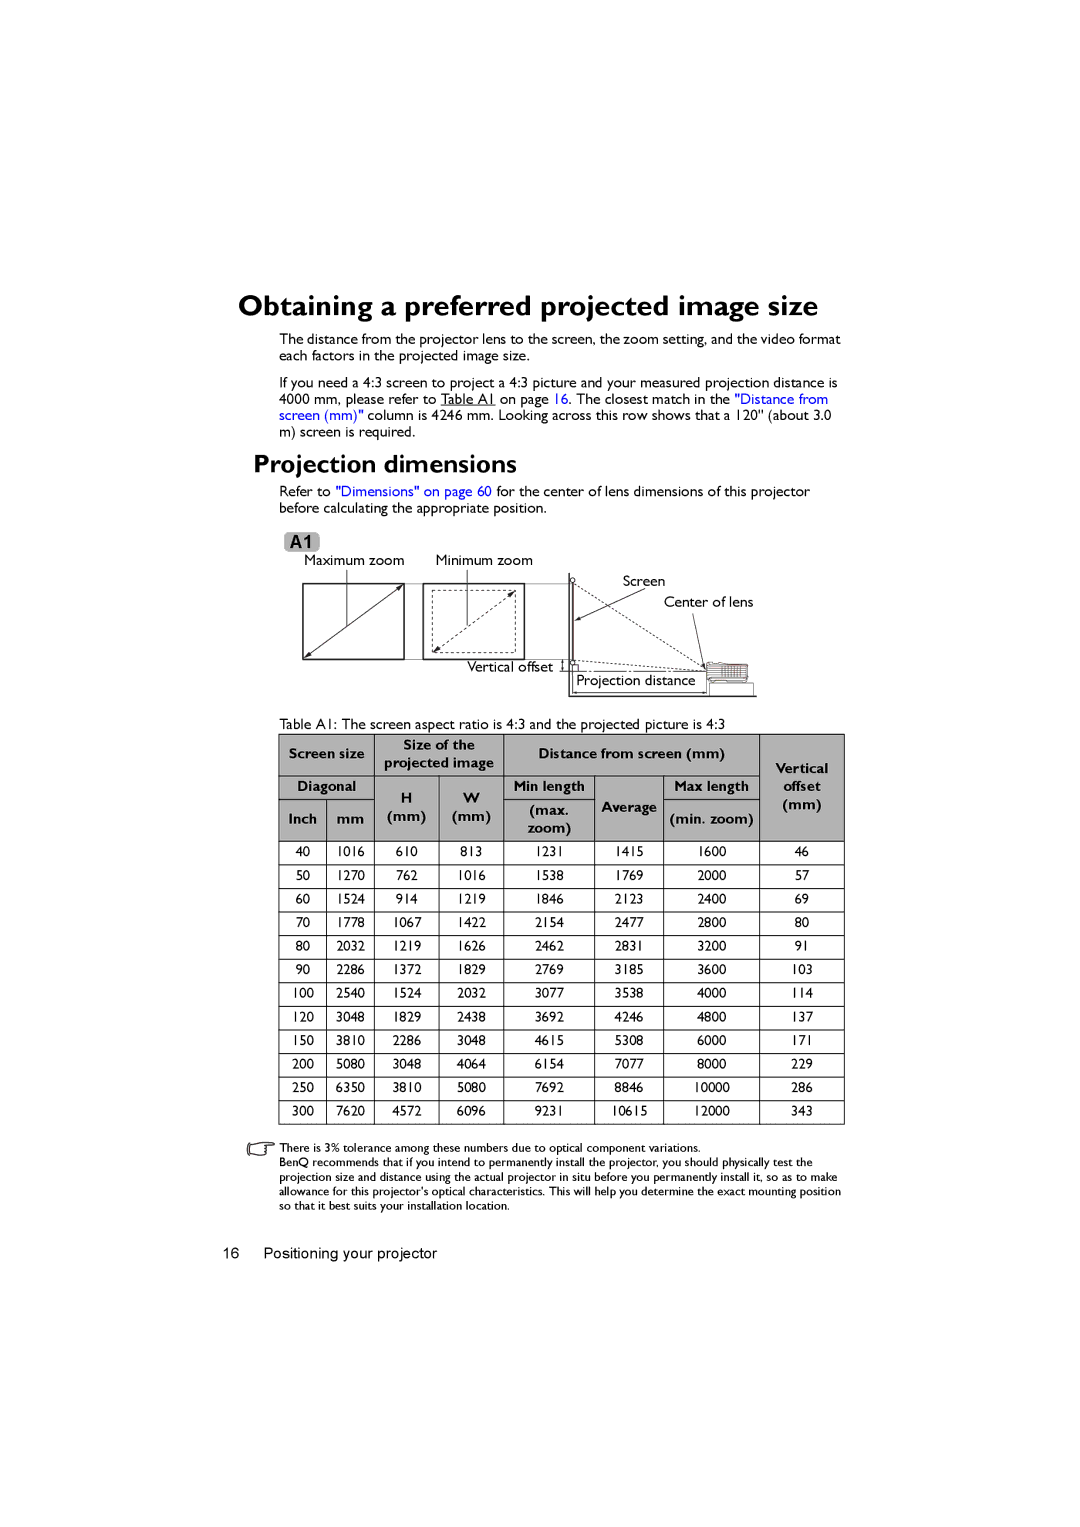 BenQ MX716, MX717 user manual Obtaining a preferred projected image size, Projection dimensions 